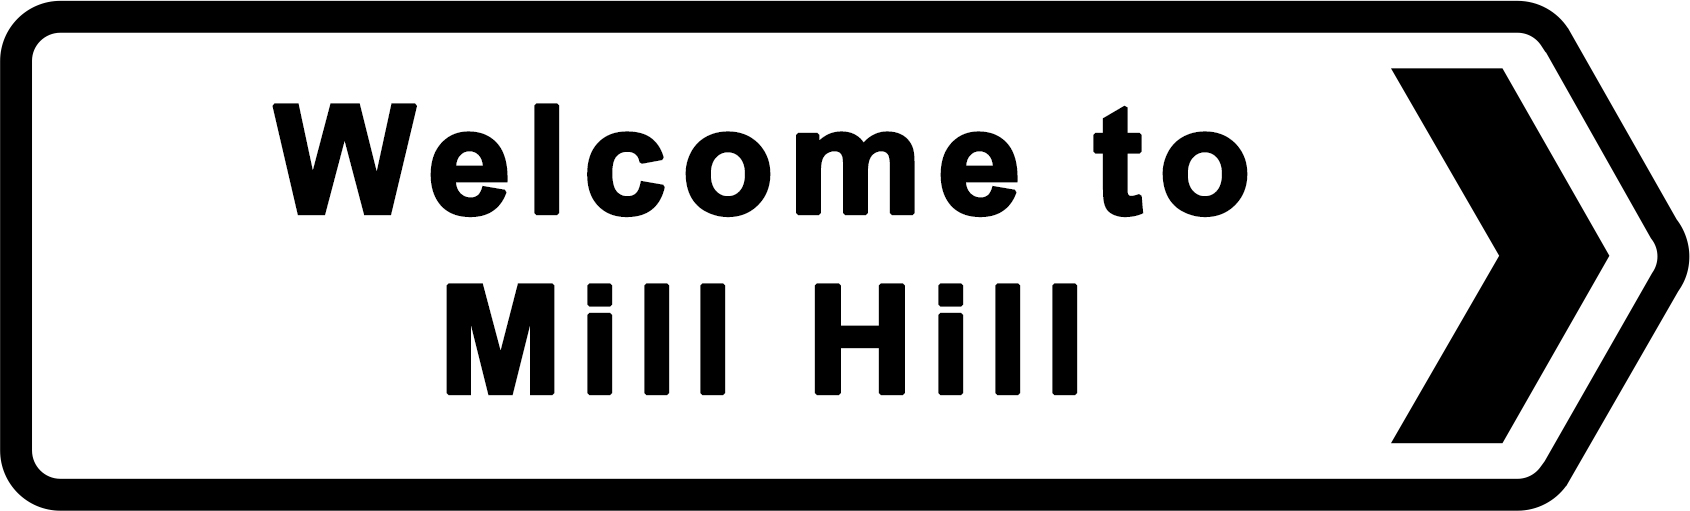 Mill Hill Village from the ridgeway (2009) - Cheap Driving Schools Lessons in Mill Hill, NW7, London borough of Barnet, North West London, Greater London